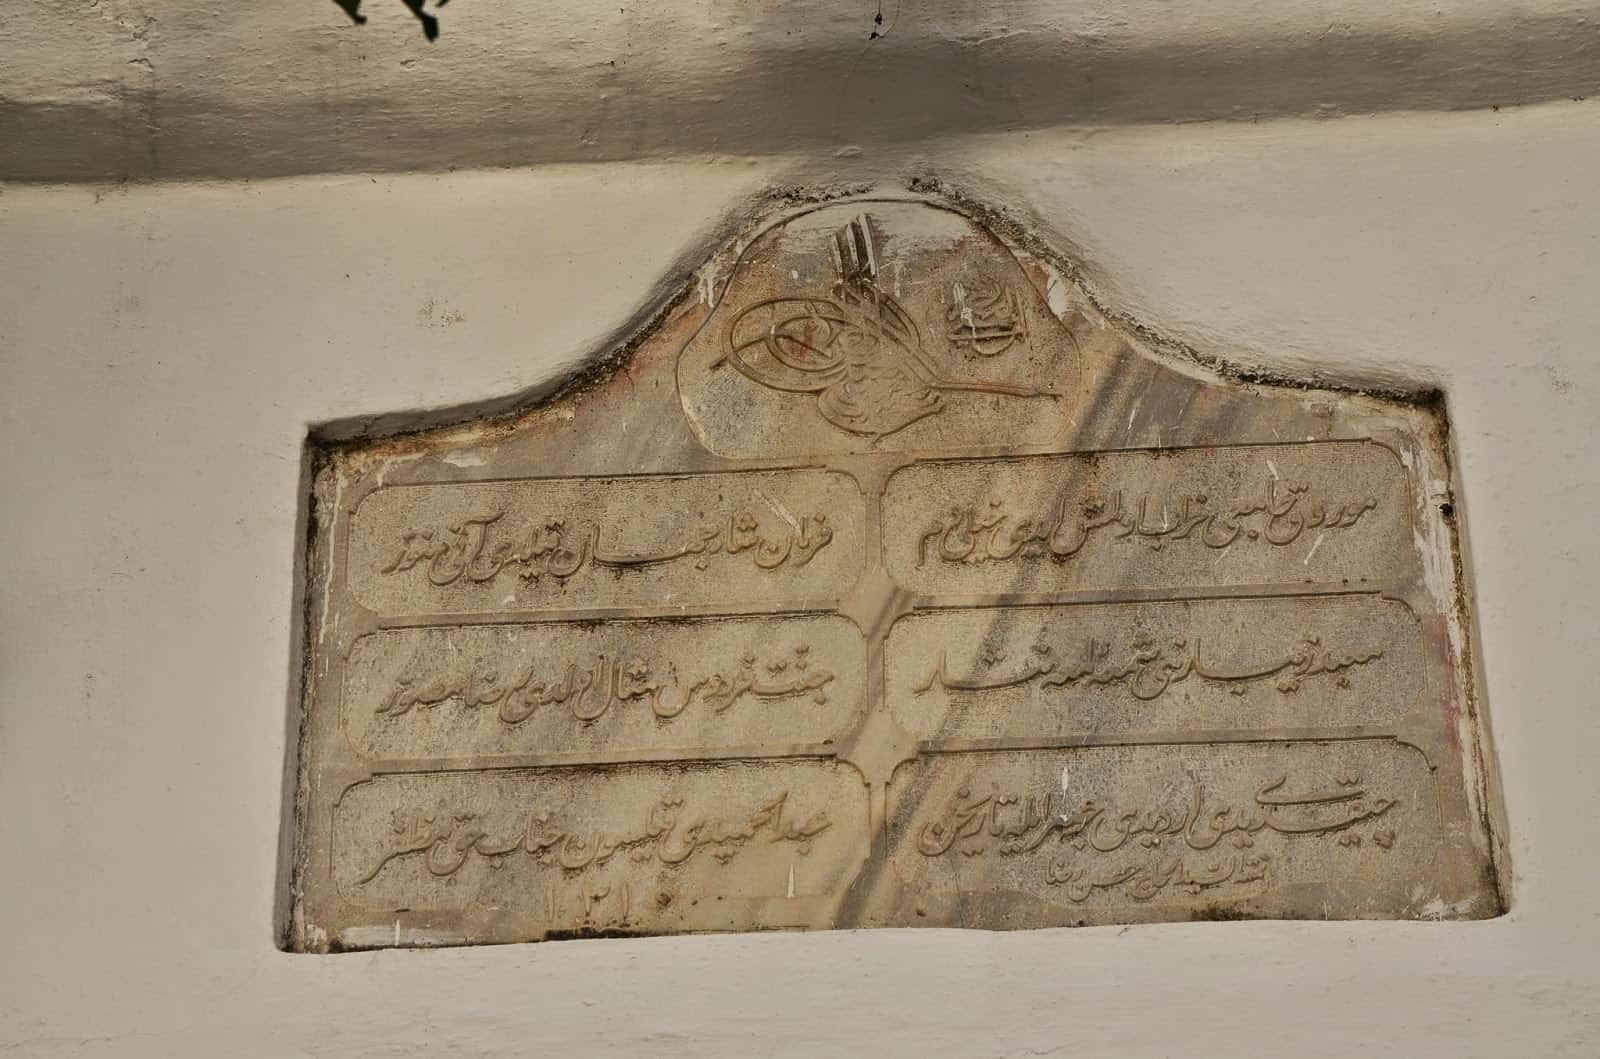 Ottoman inscription from the Rifat Efendi Mosque in Kos, Greece